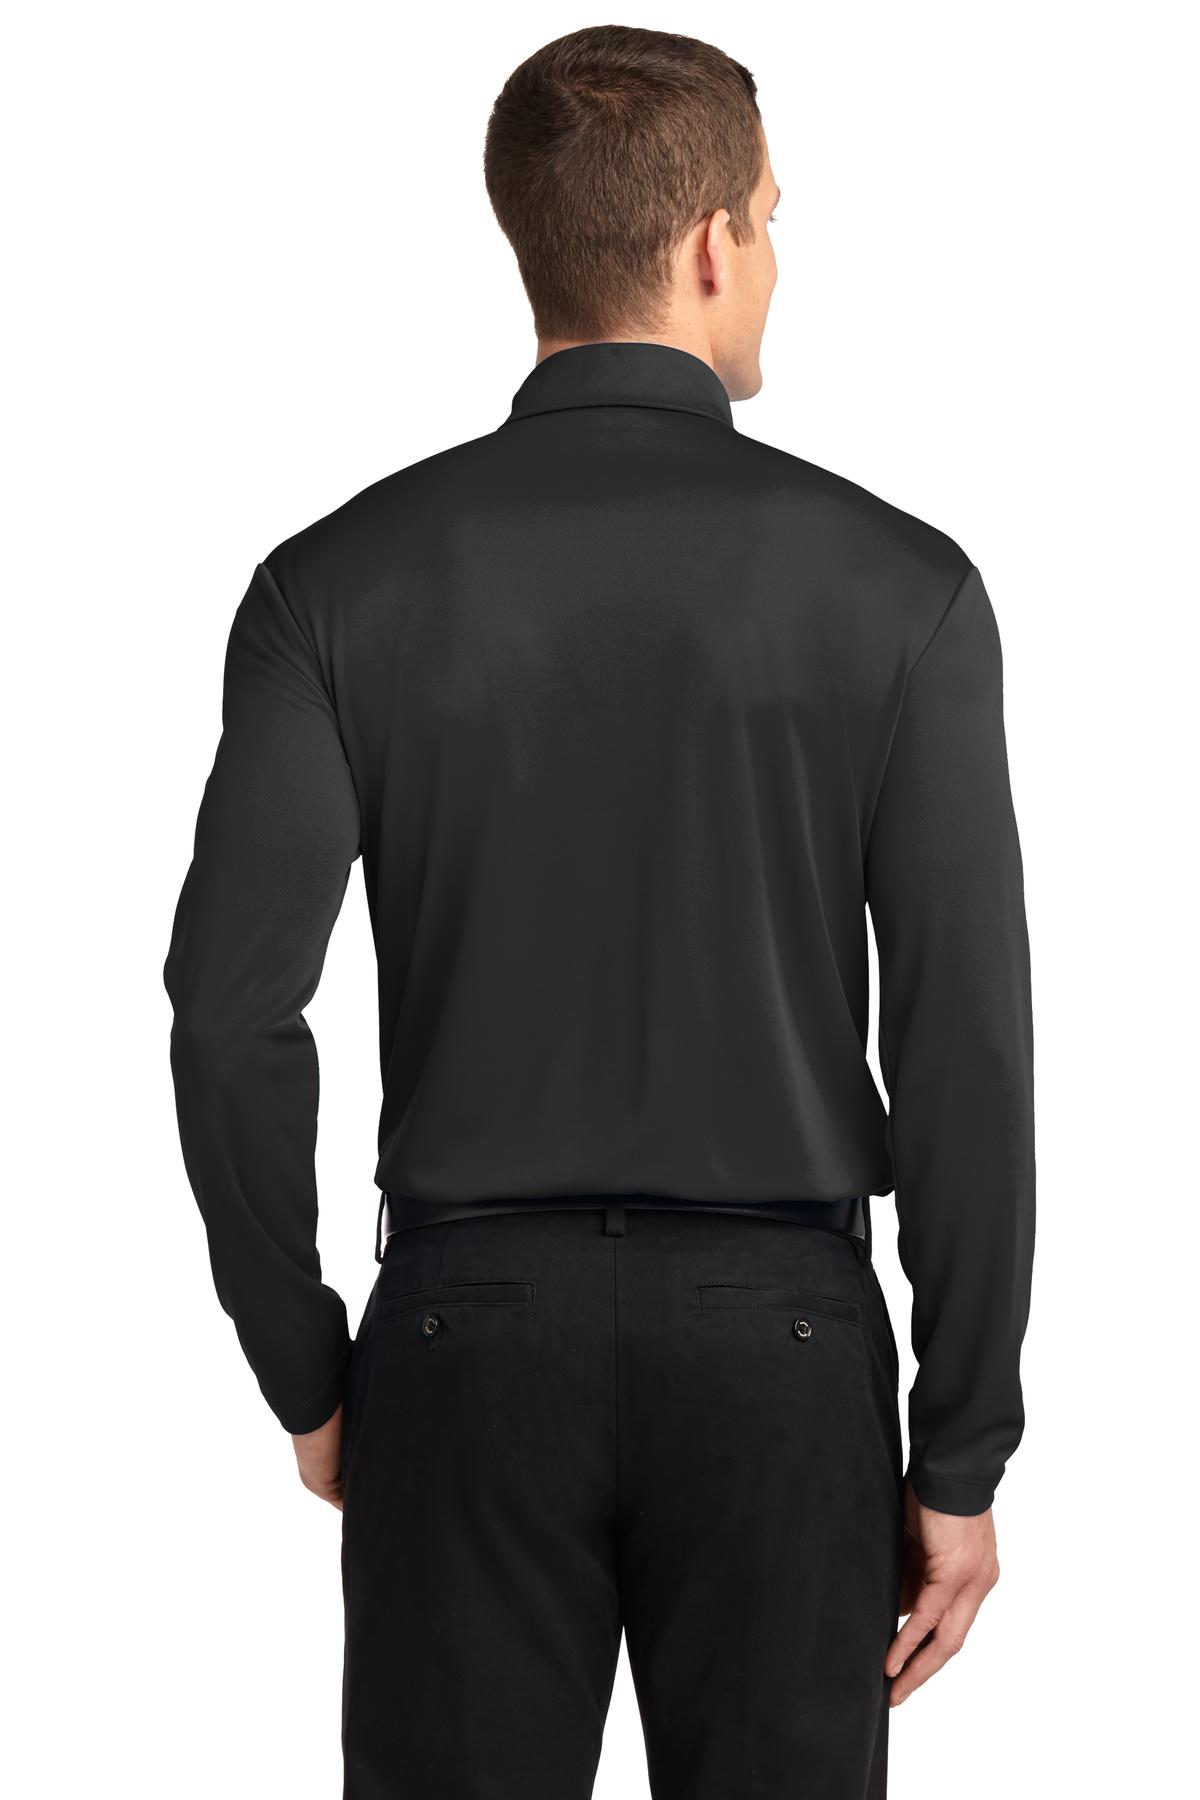 Silk Touch™ Performance Long Sleeve Polo. K540LS